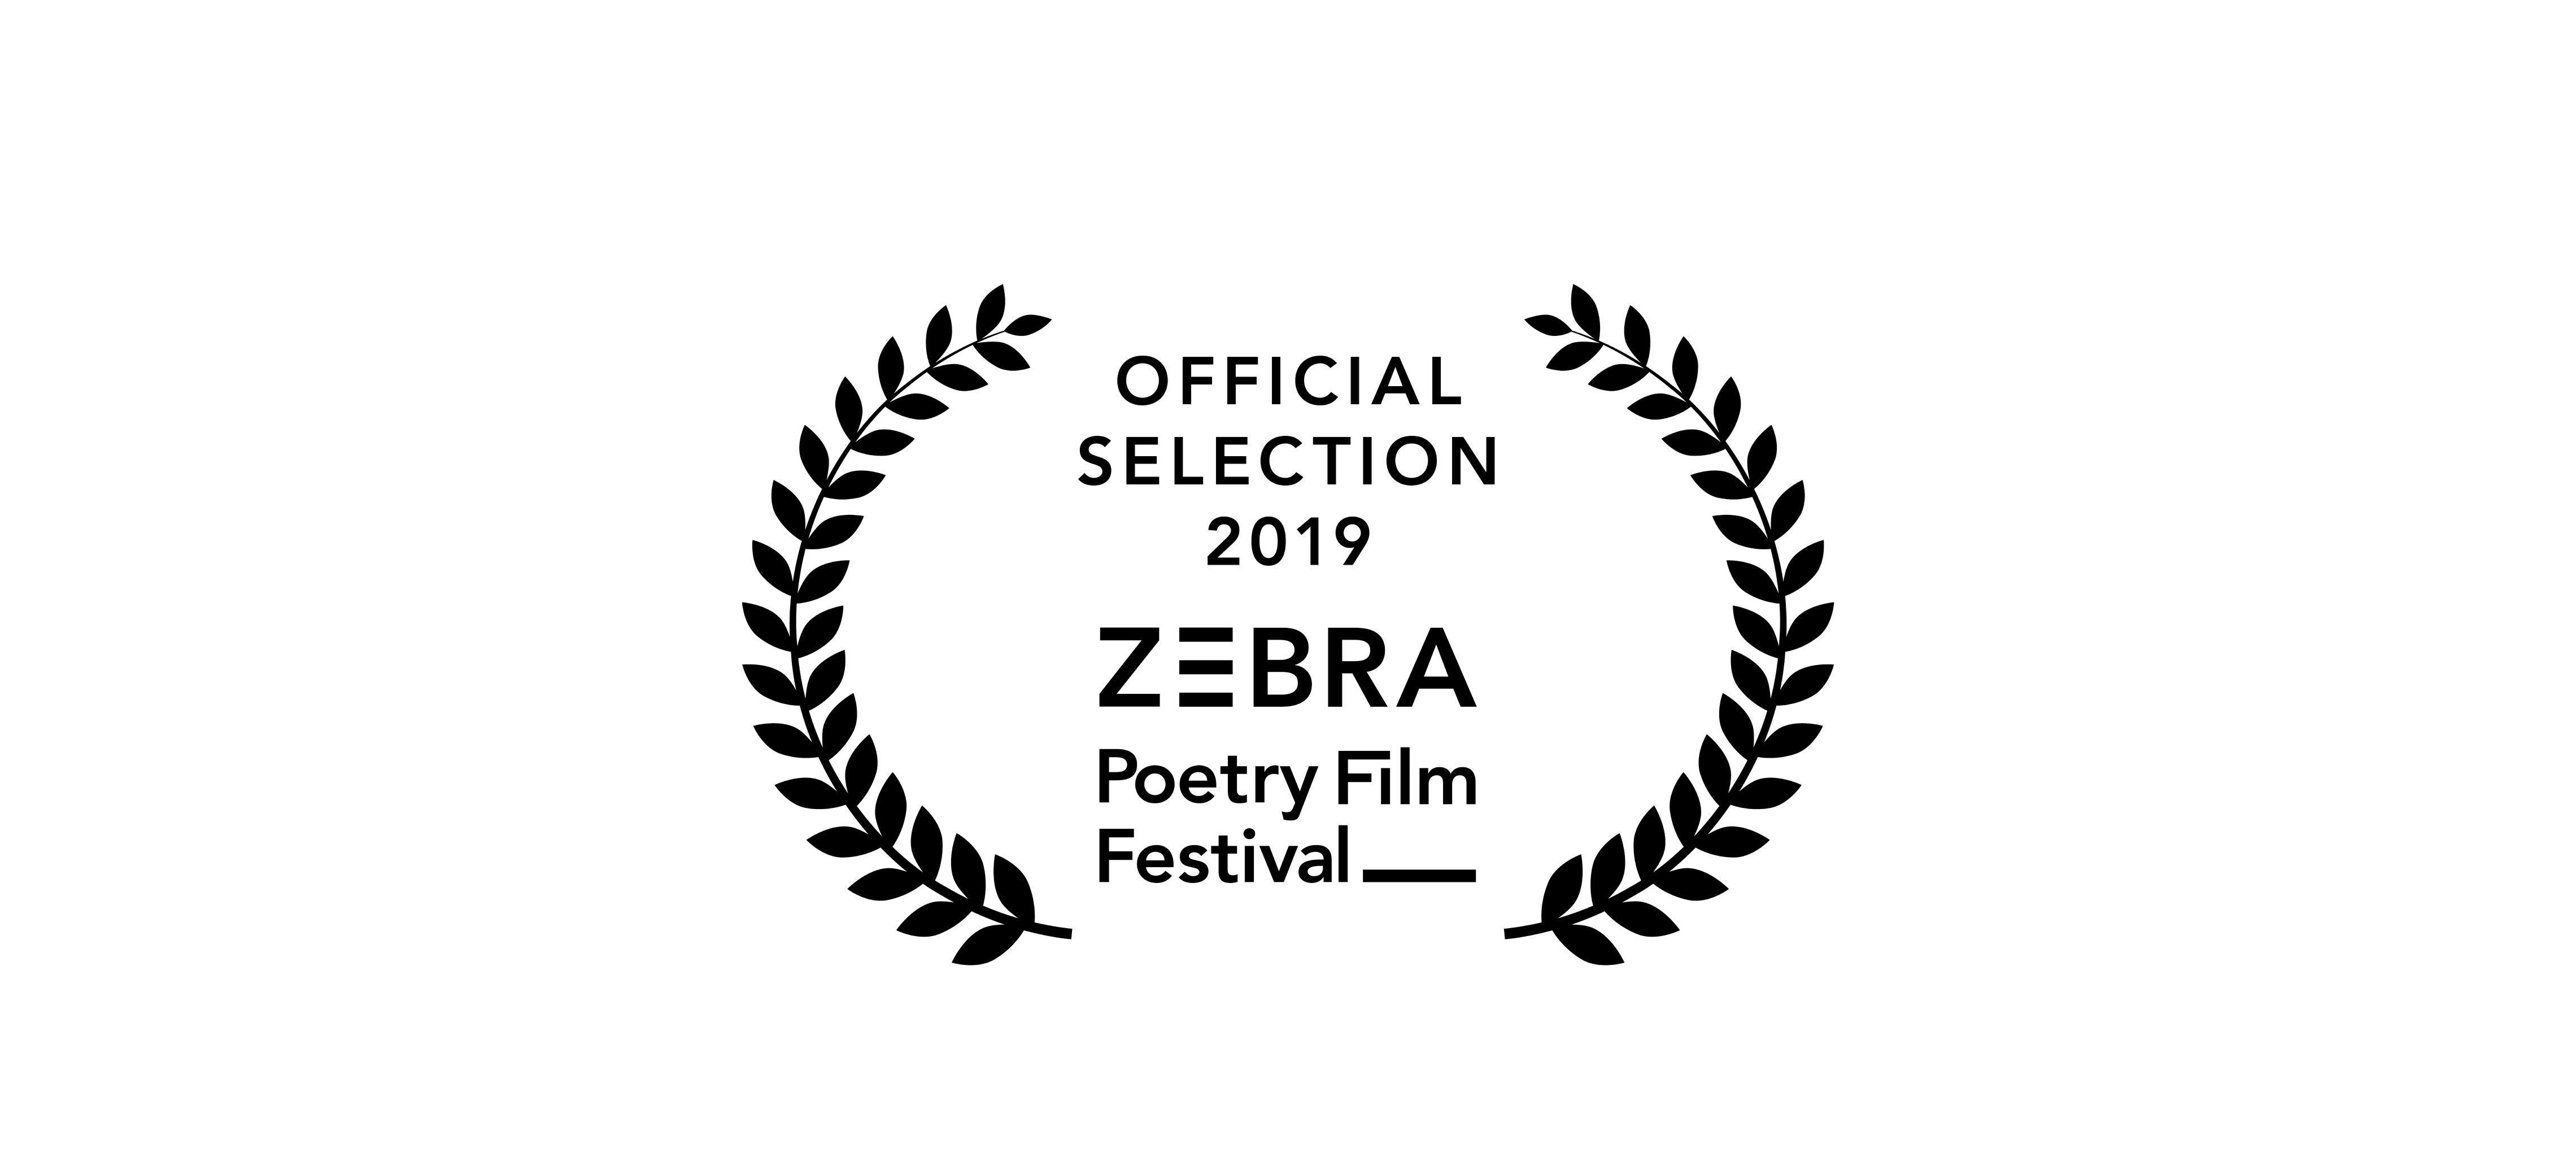 liasaile_tunis_zebra_poetryfilm_lorbers_official_selection